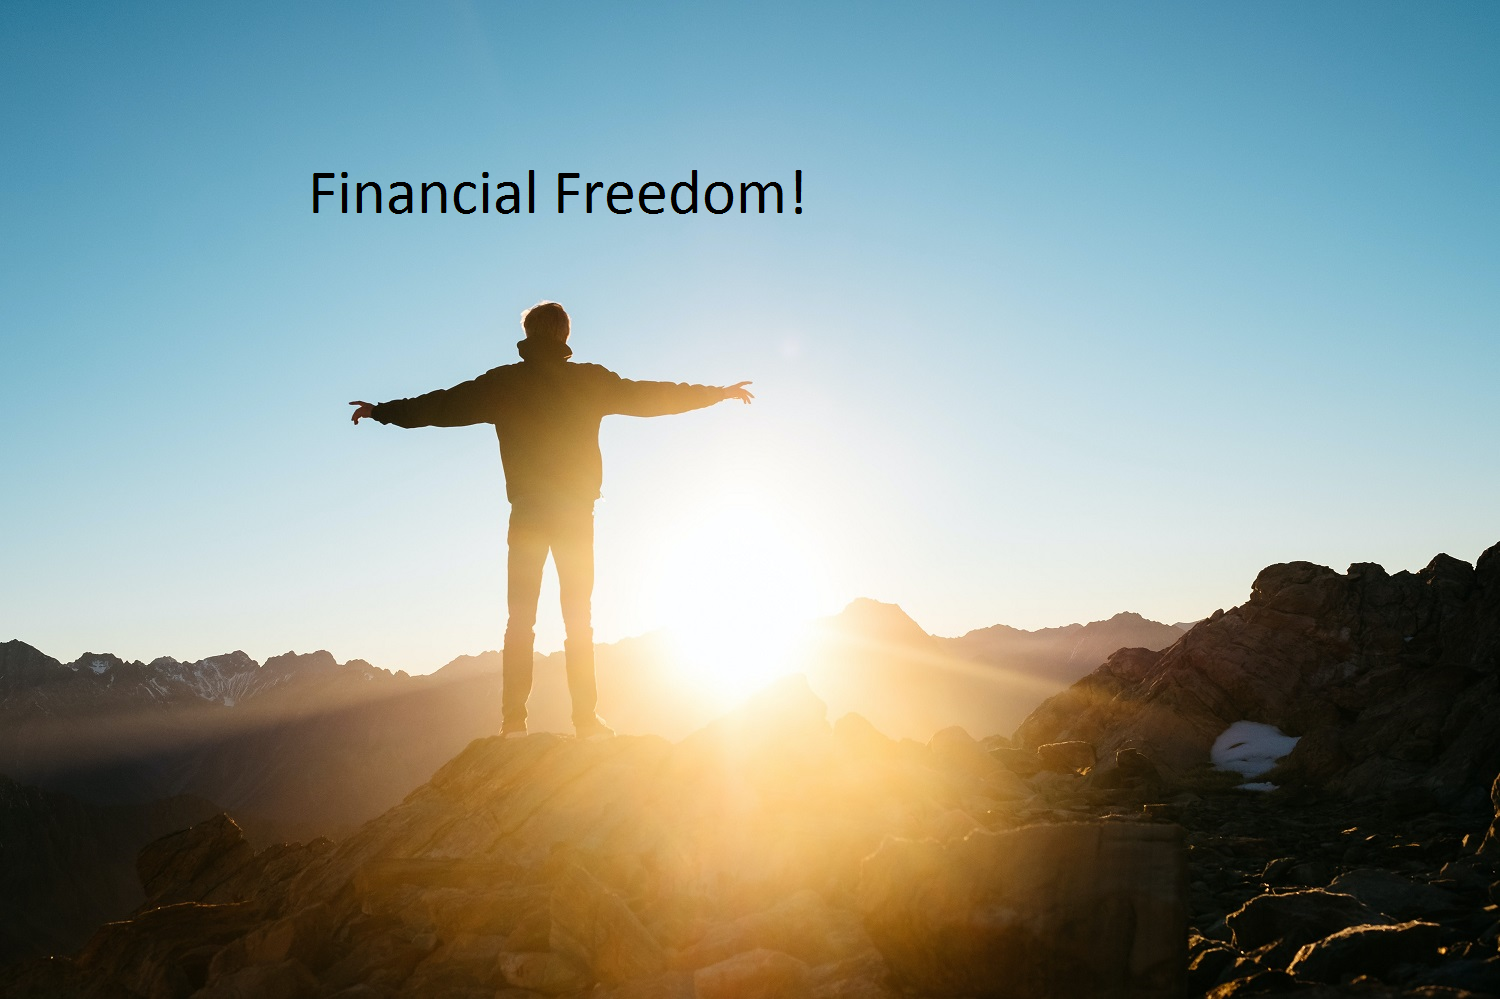 financial freedom pic for email